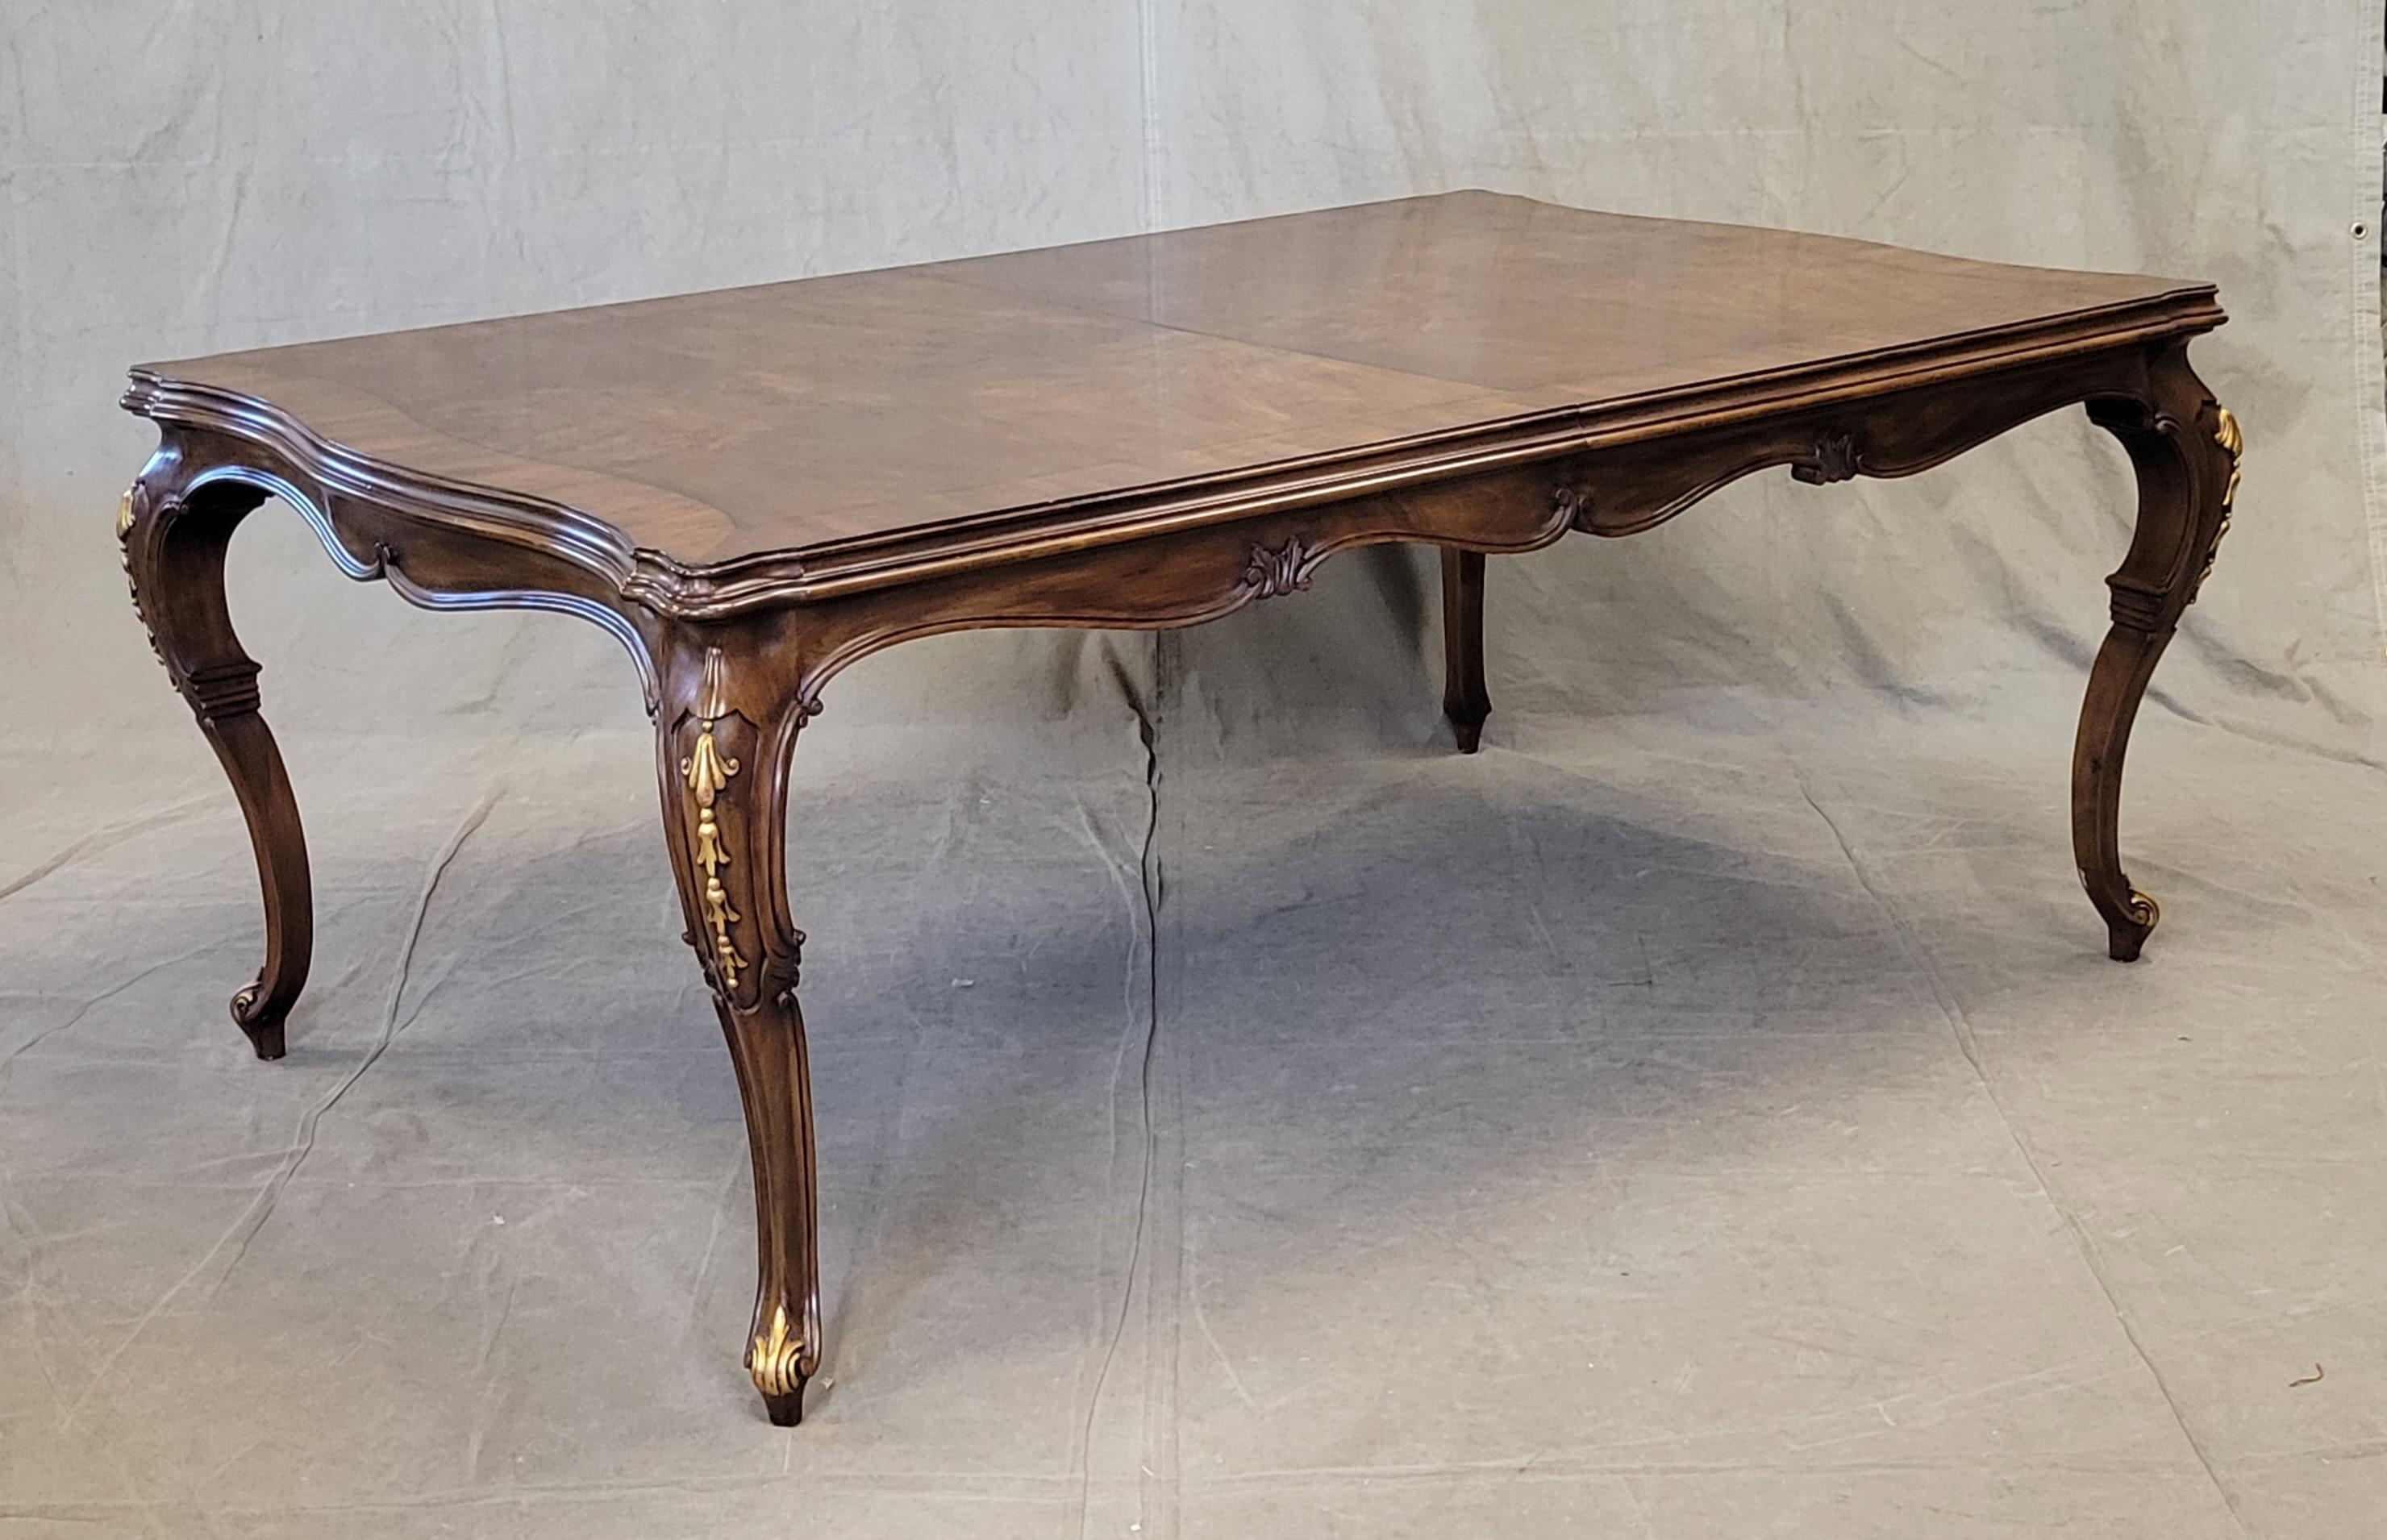 A stunning vintage Karges Furniture French Louis XV style six foot long burl walnut dining table. Included are four 20